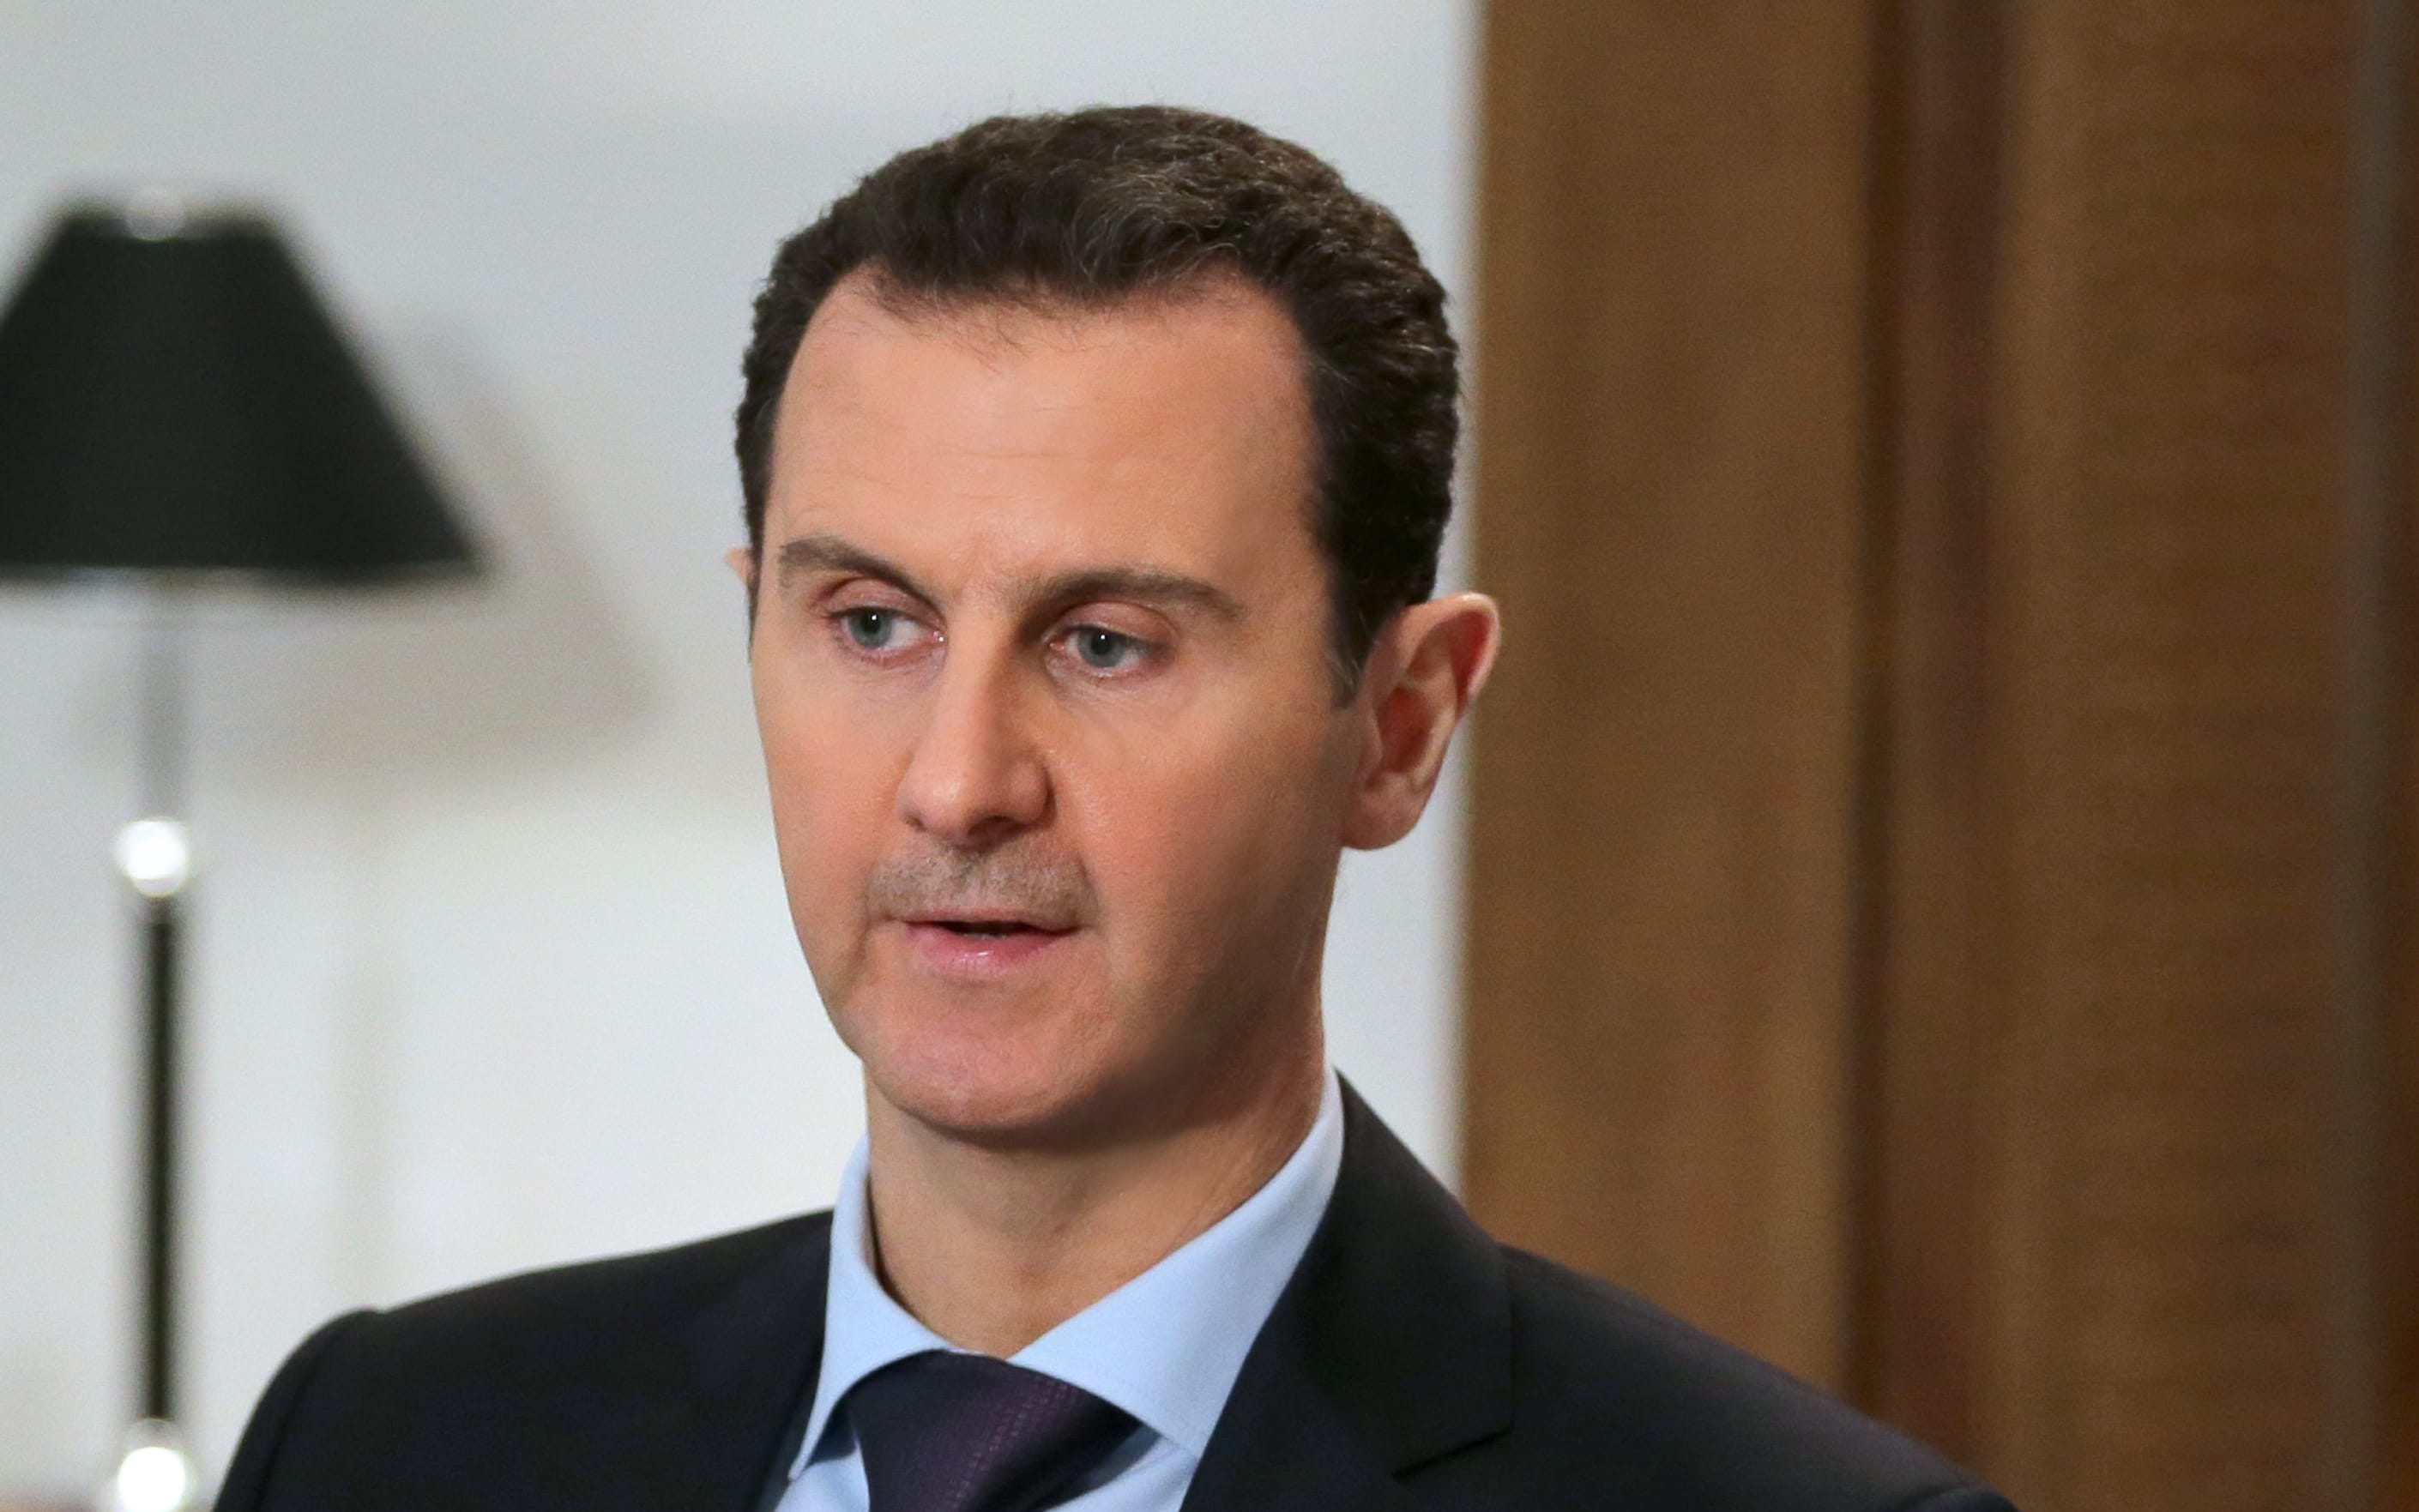 Syrian President Bashar al-Assad in an exclusive interview with AFP in the capital Damascus 11 February 2016.